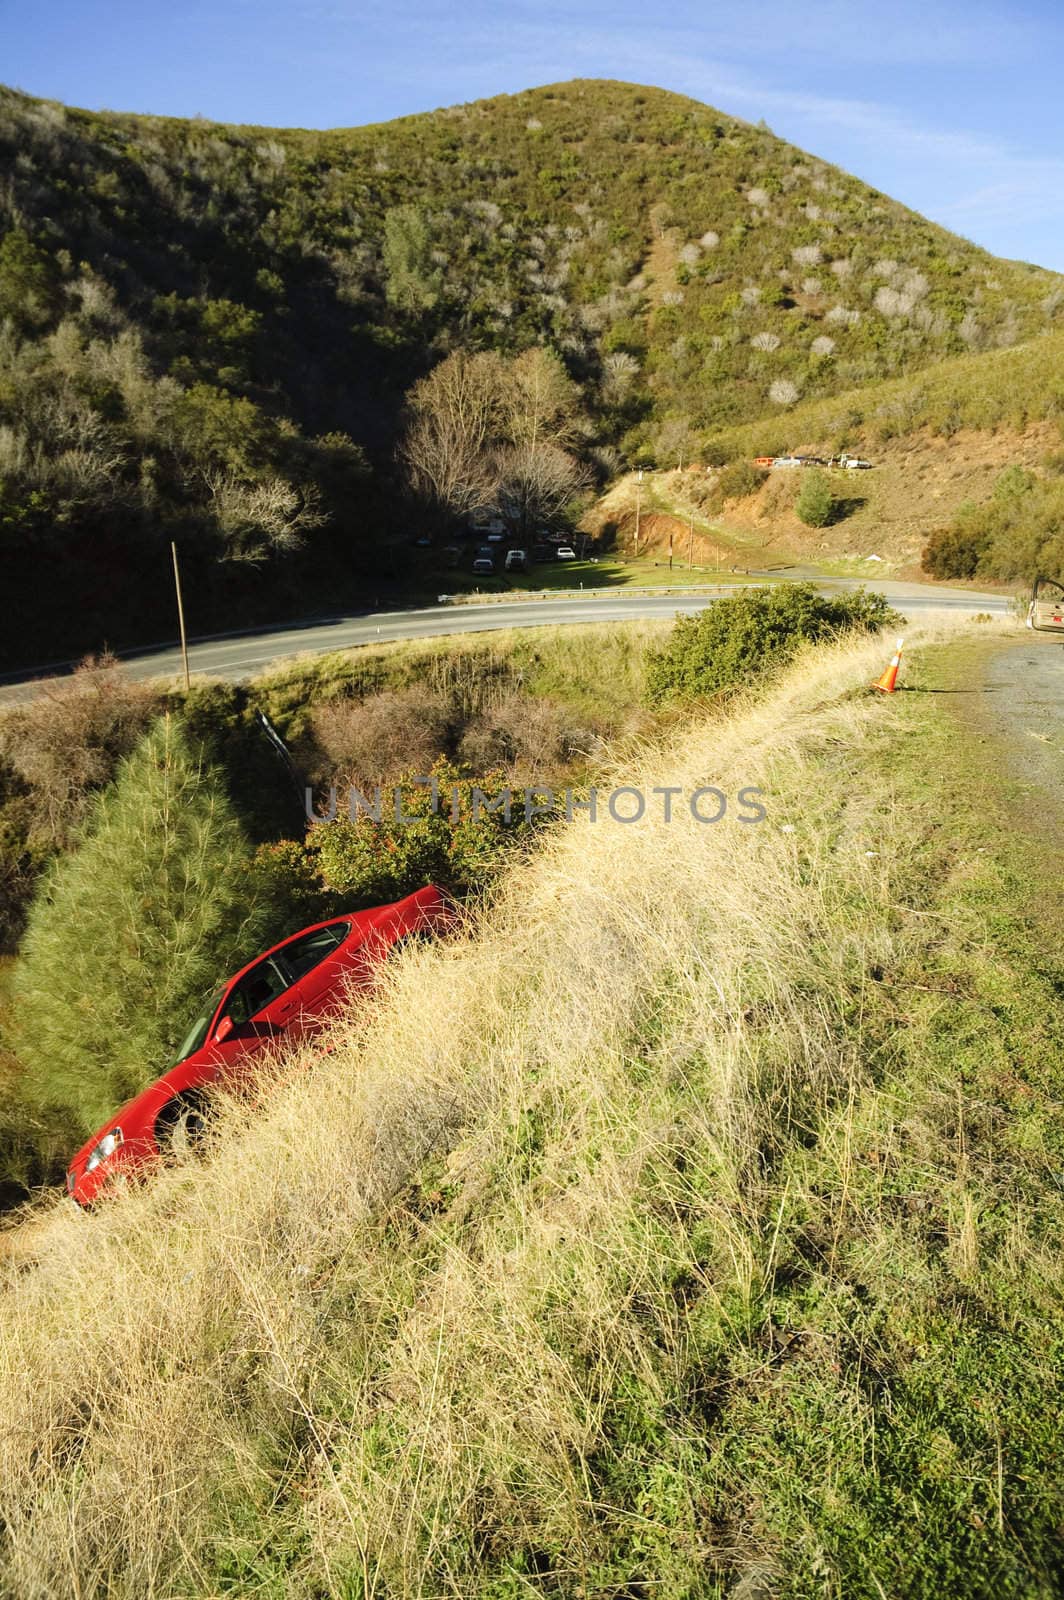 Car slid off the road and down a slope in Northern california by jeffbanke